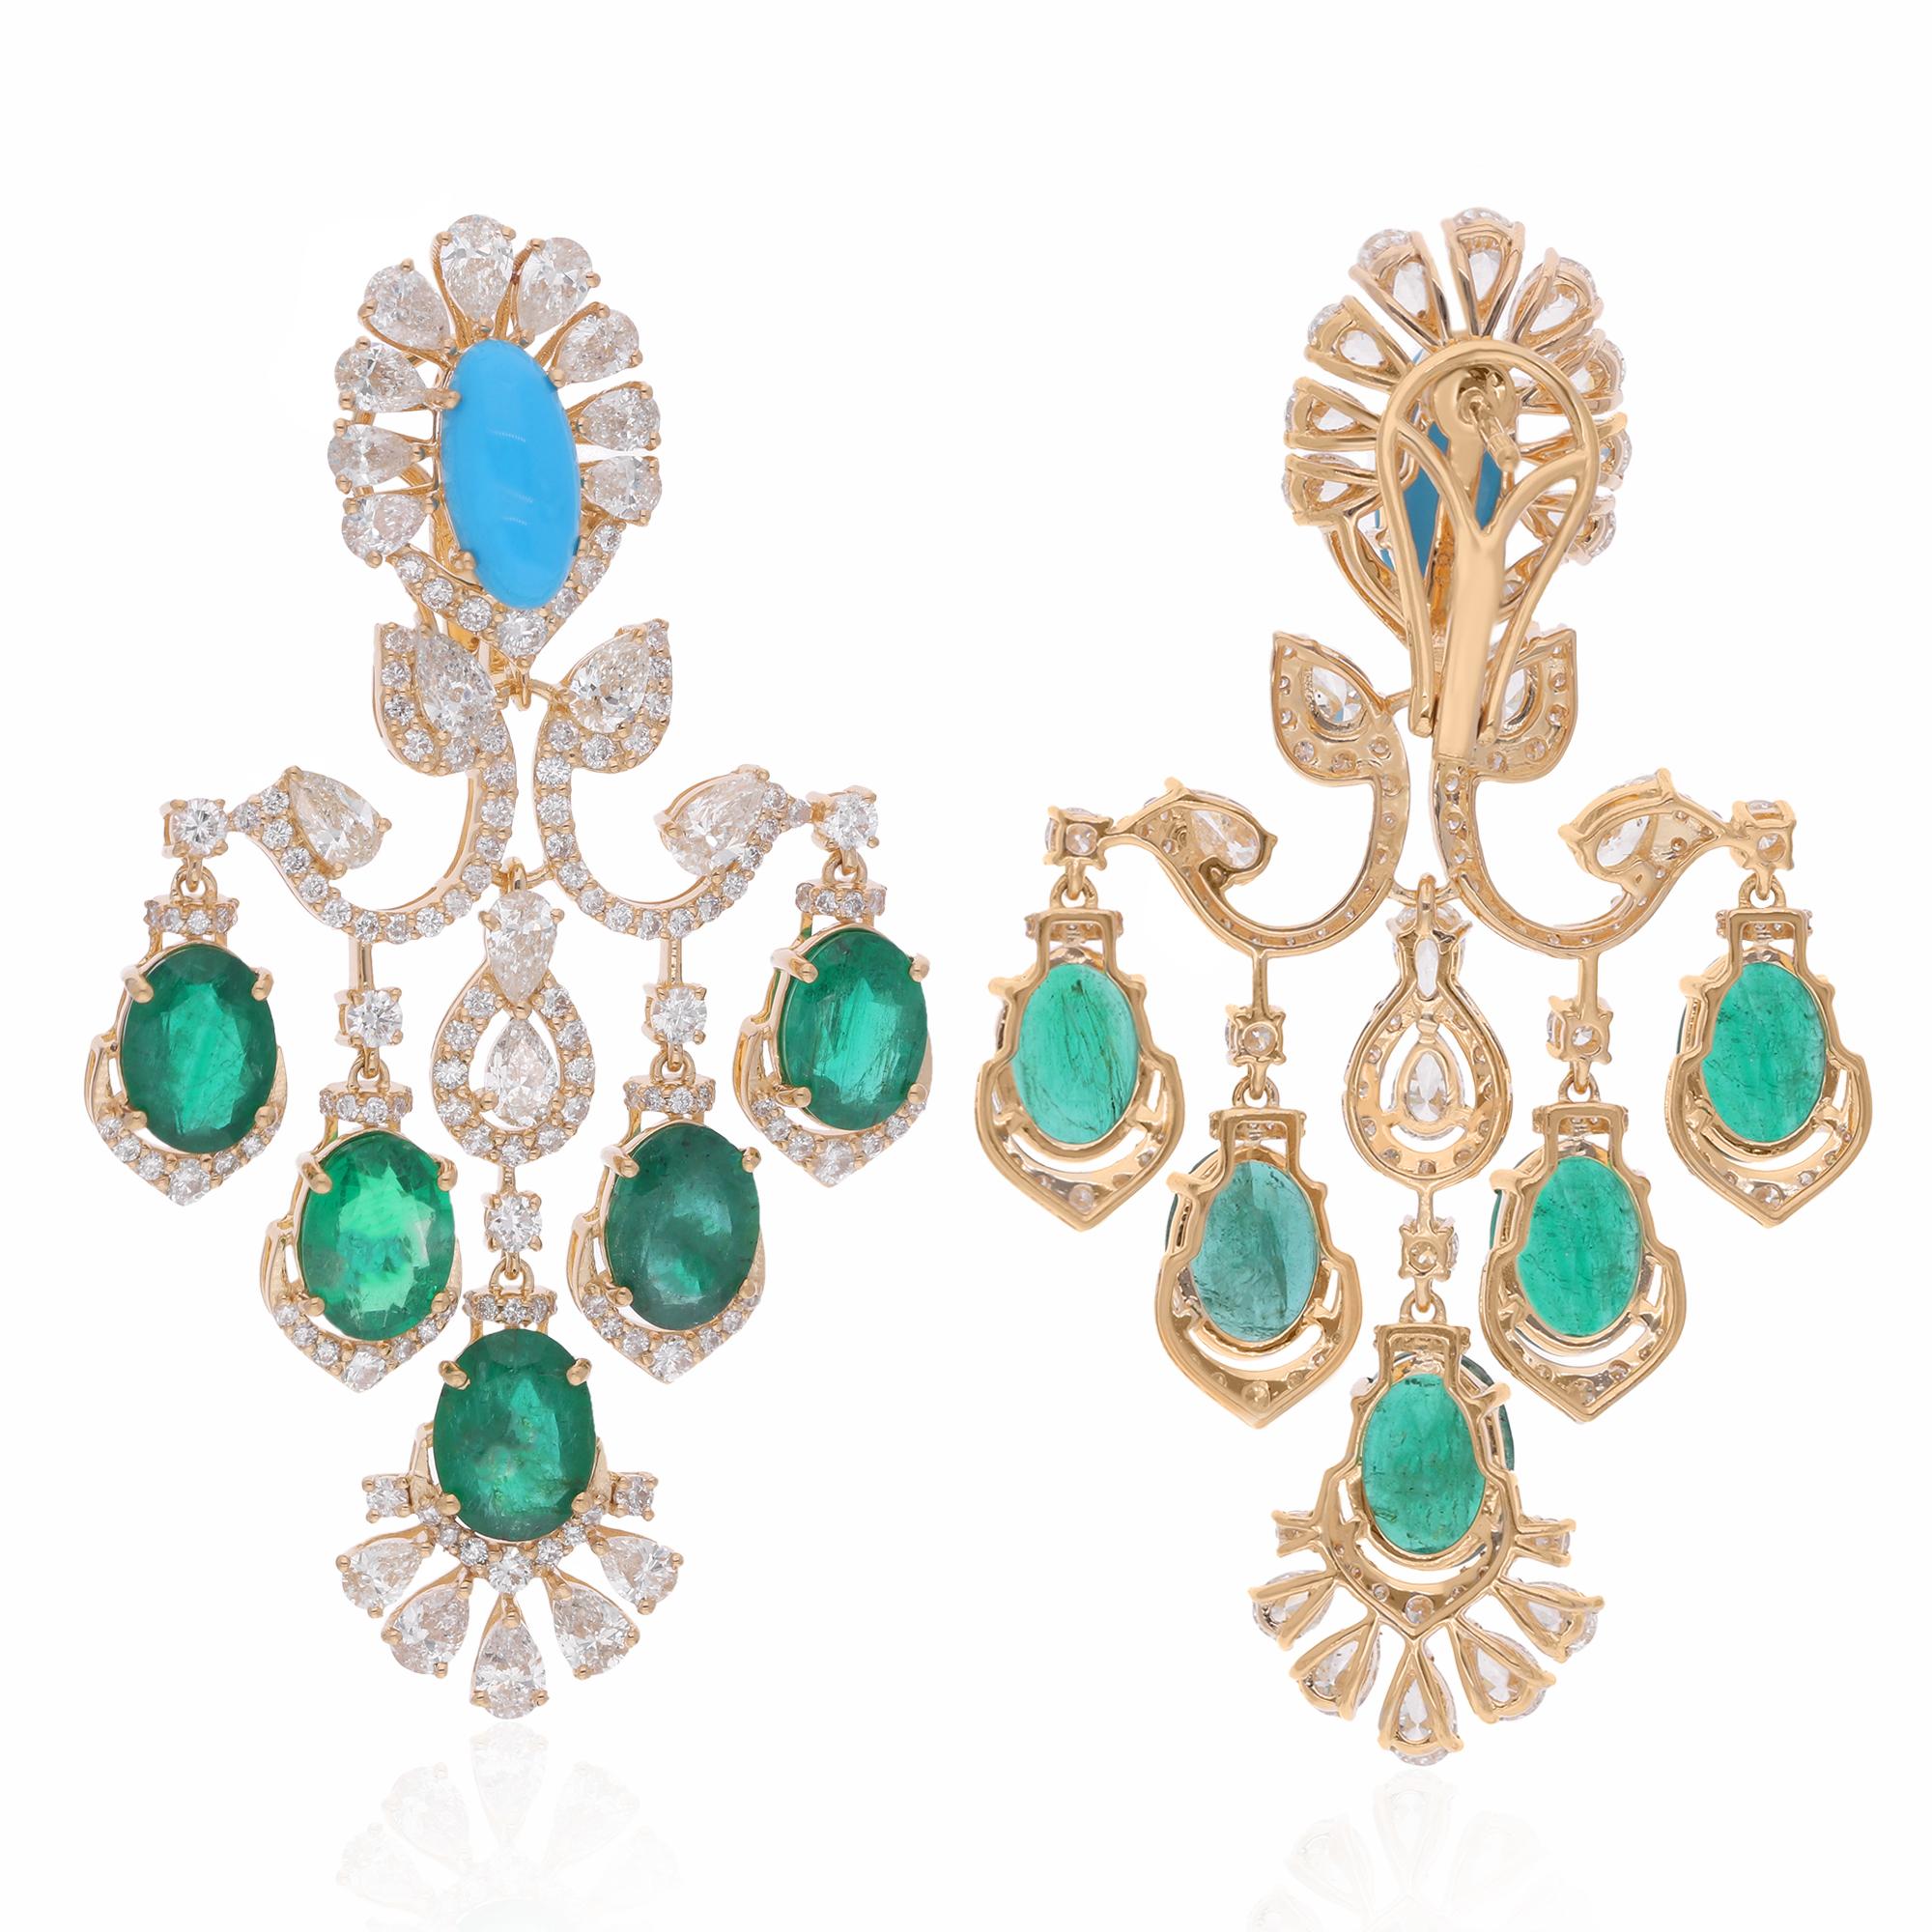 Item Code :- SEE-15554B
Gross Wt. :- 20.49 gm
18k Yellow Gold Wt. :- 16.69 gm
Natural Diamond Wt. :- 6.21 Ct.  ( AVERAGE DIAMOND CLARITY SI1-SI2 & COLOR H-I )
Emerald & Turquoise Wt. :- 12.79 Ct.
Earrings Size :- 56 x 32 mm approx.

✦